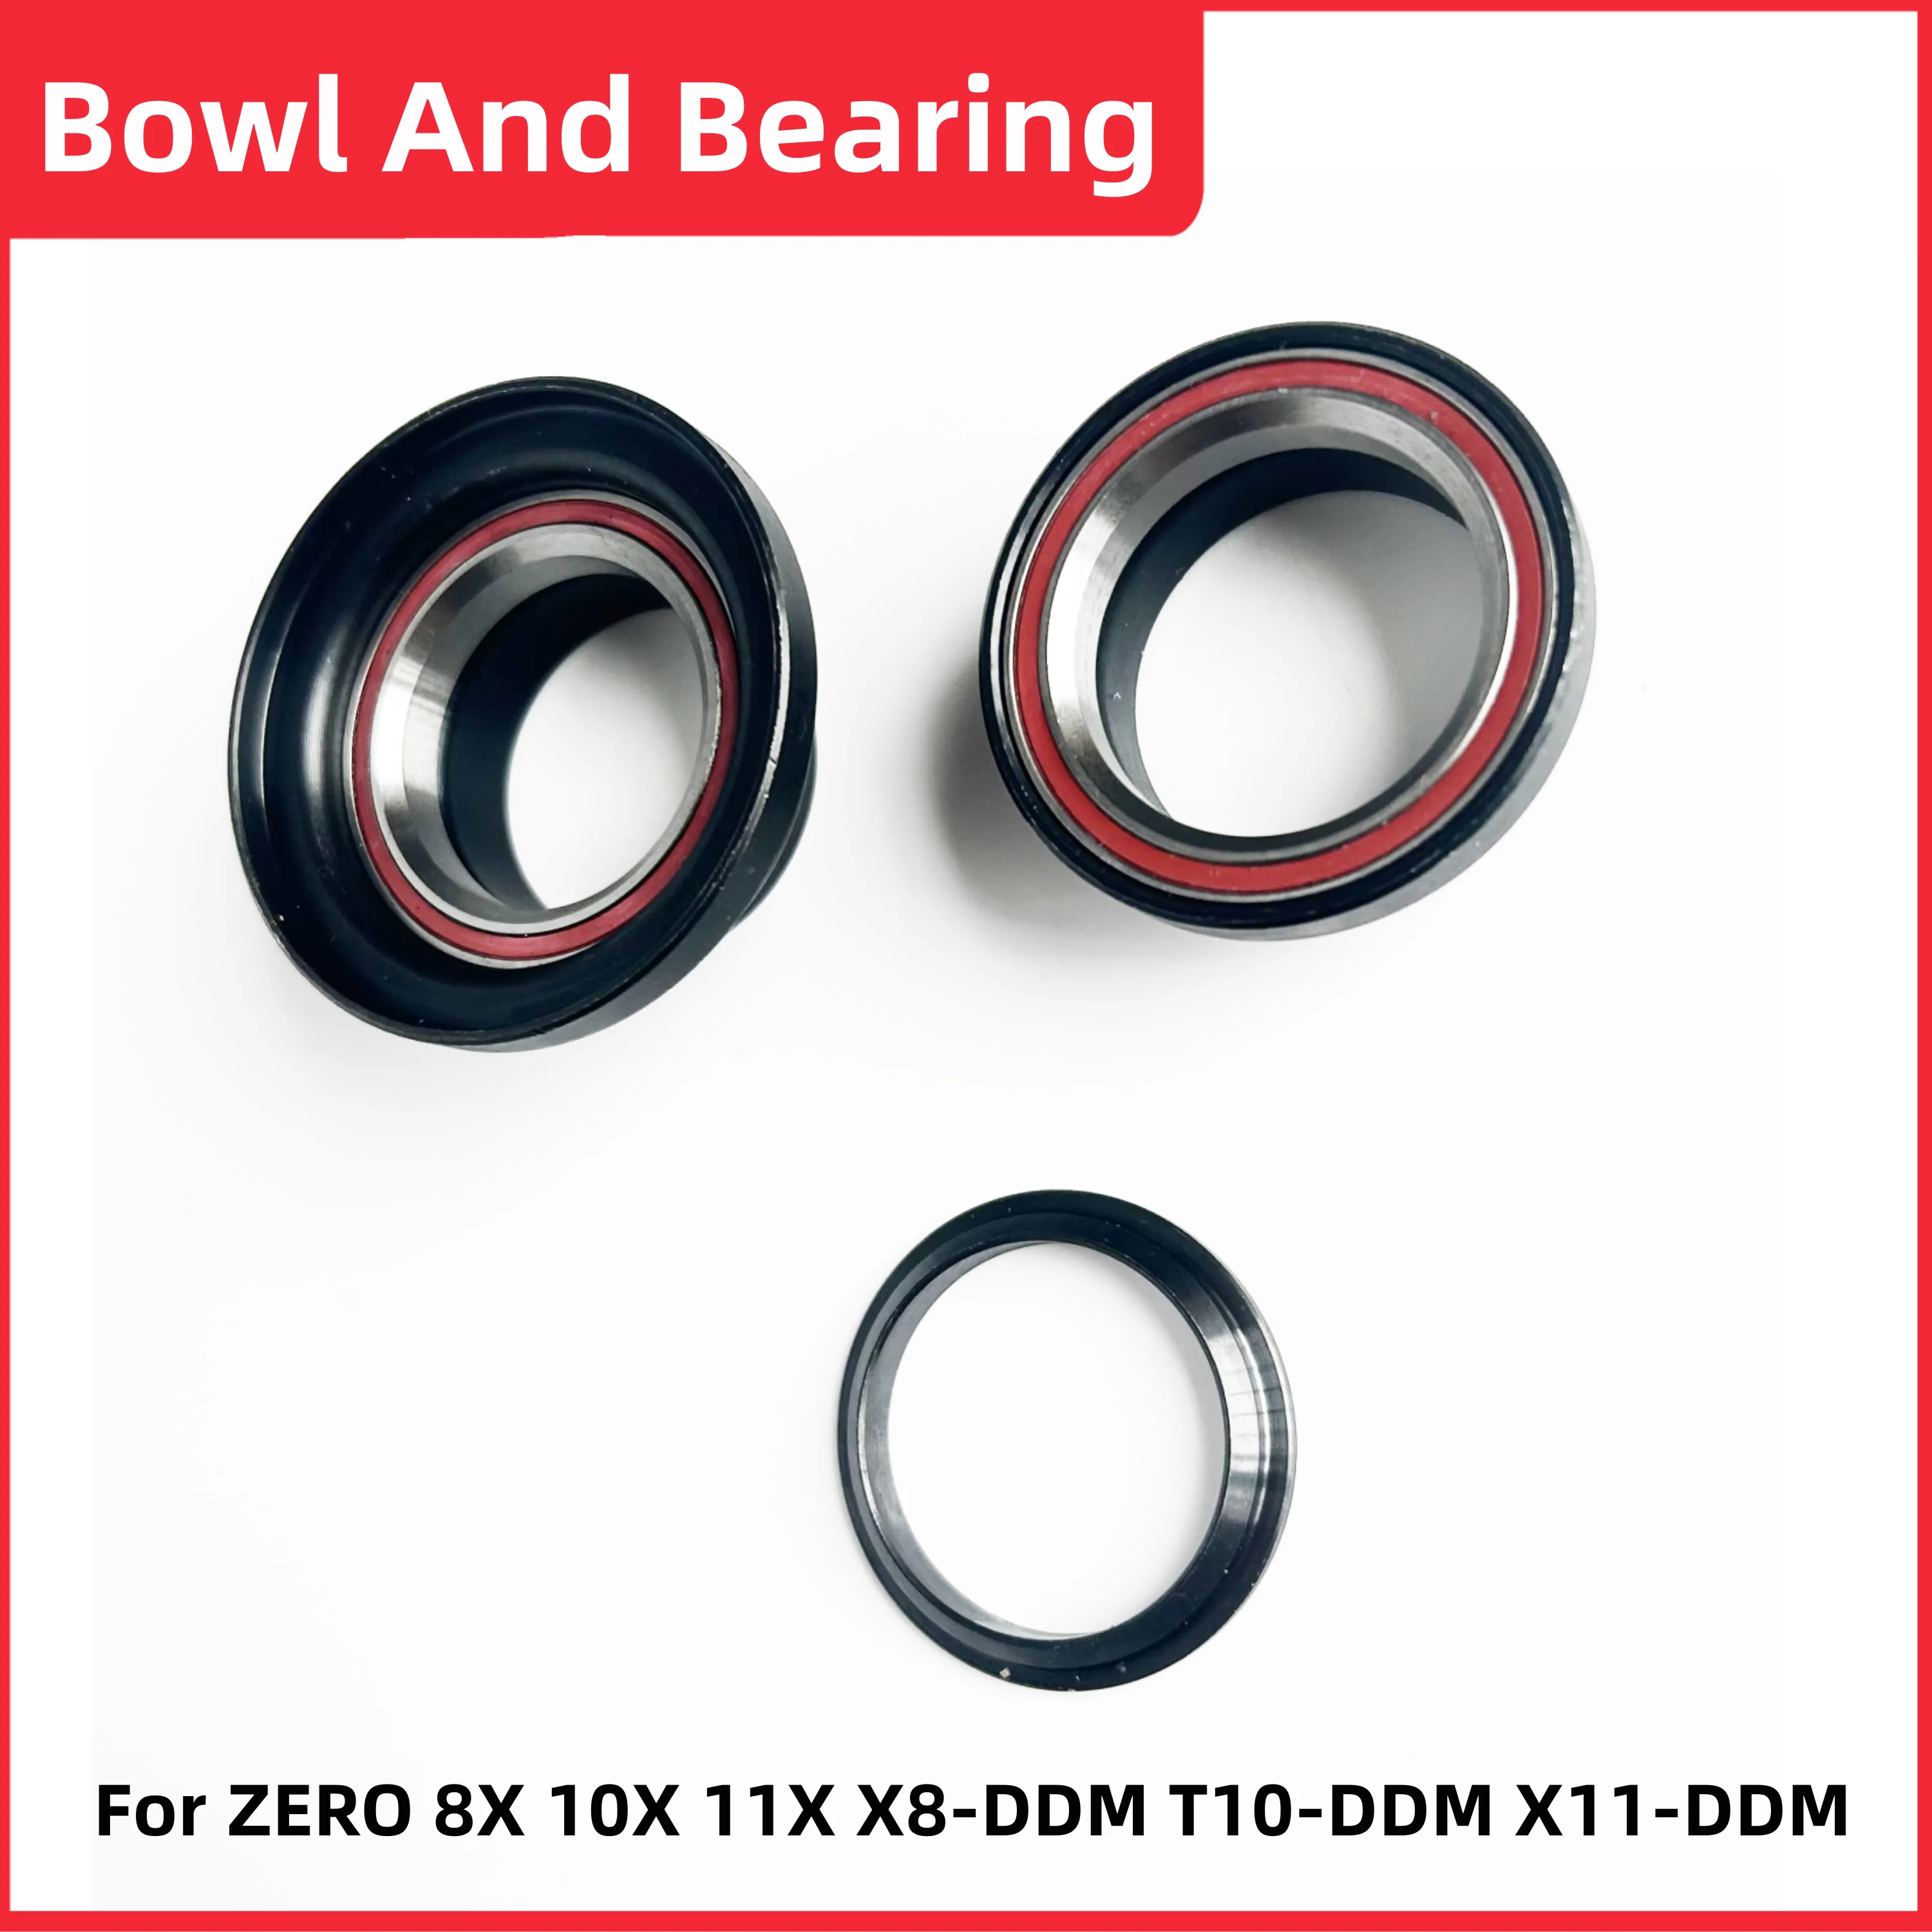 

Original Upper & Lower Bowl And Bearing For ZERO 8X 10X 11X X8-DDM T10-DDM X11-DDM Electric Scooter Spare Parts